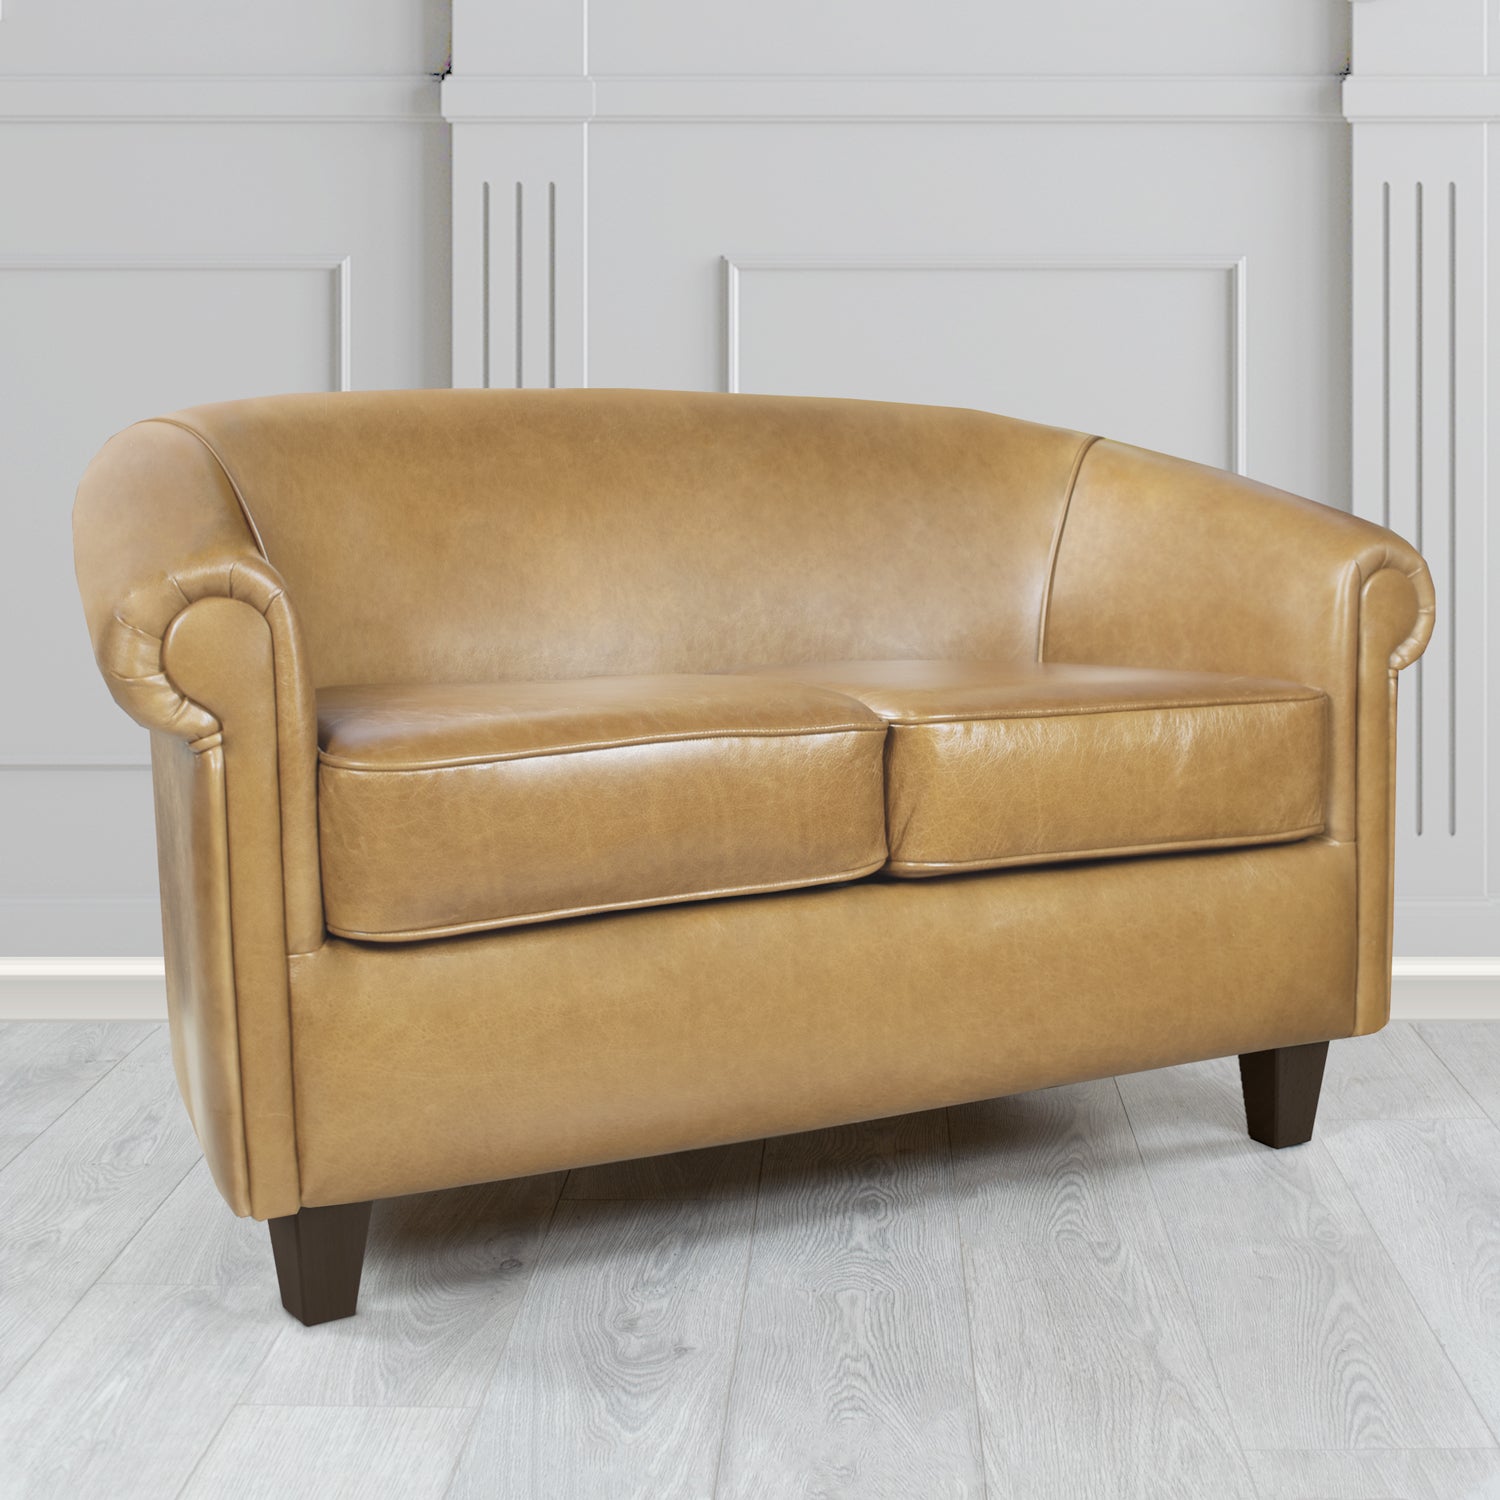 Siena 2 Seater Tub Sofa in Crib 5 Old English Parchment Genuine Leather - The Tub Chair Shop